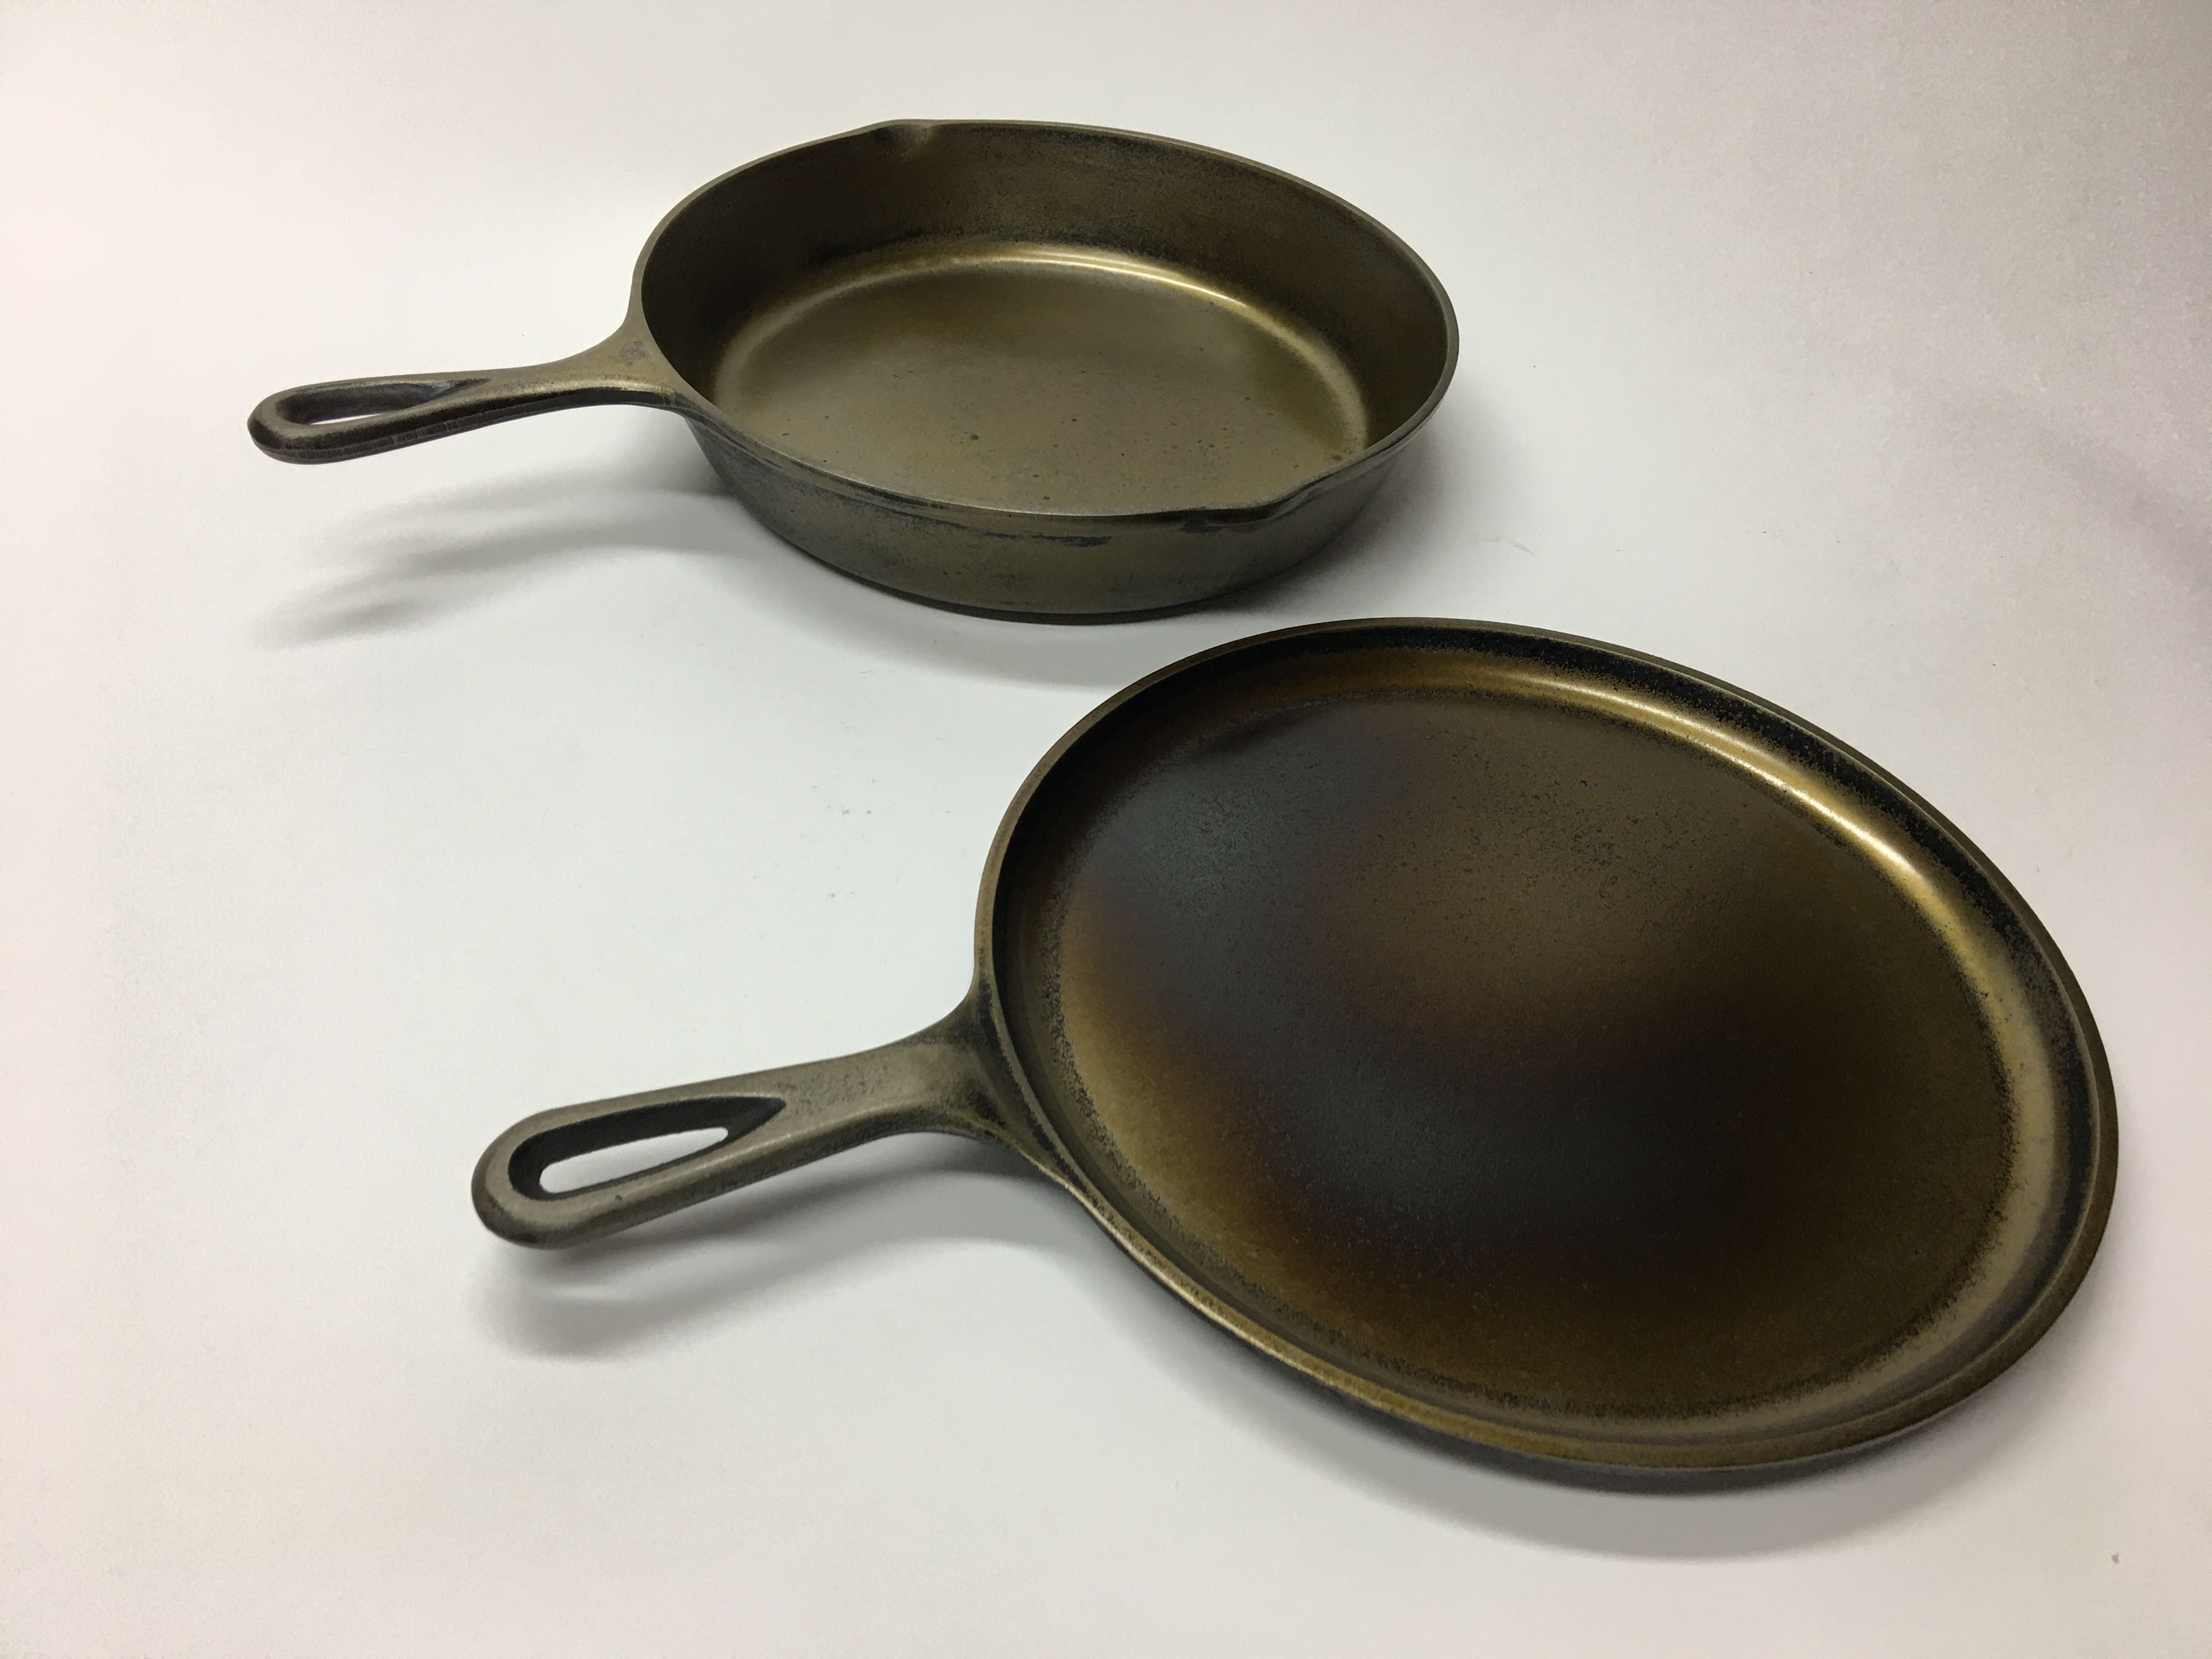 Carbon Steel or Cast Iron? Your FAQs answered – Smithey Ironware